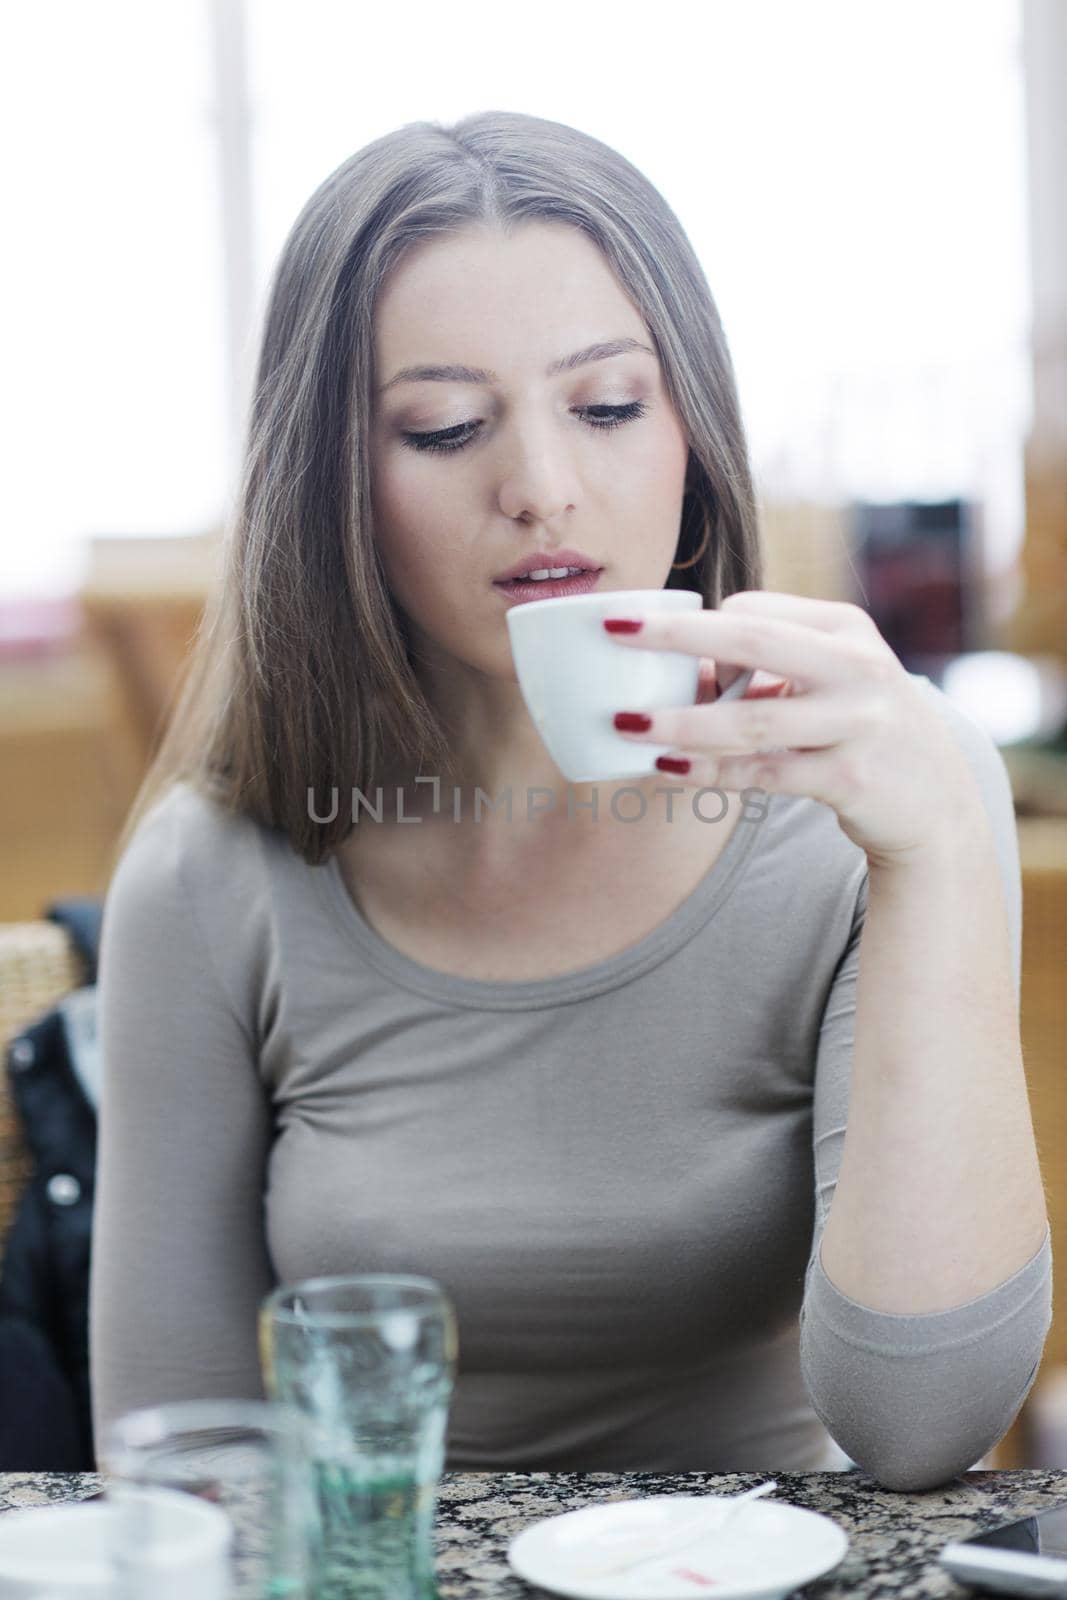 beautiful young woman student portrait while relax on coffee break